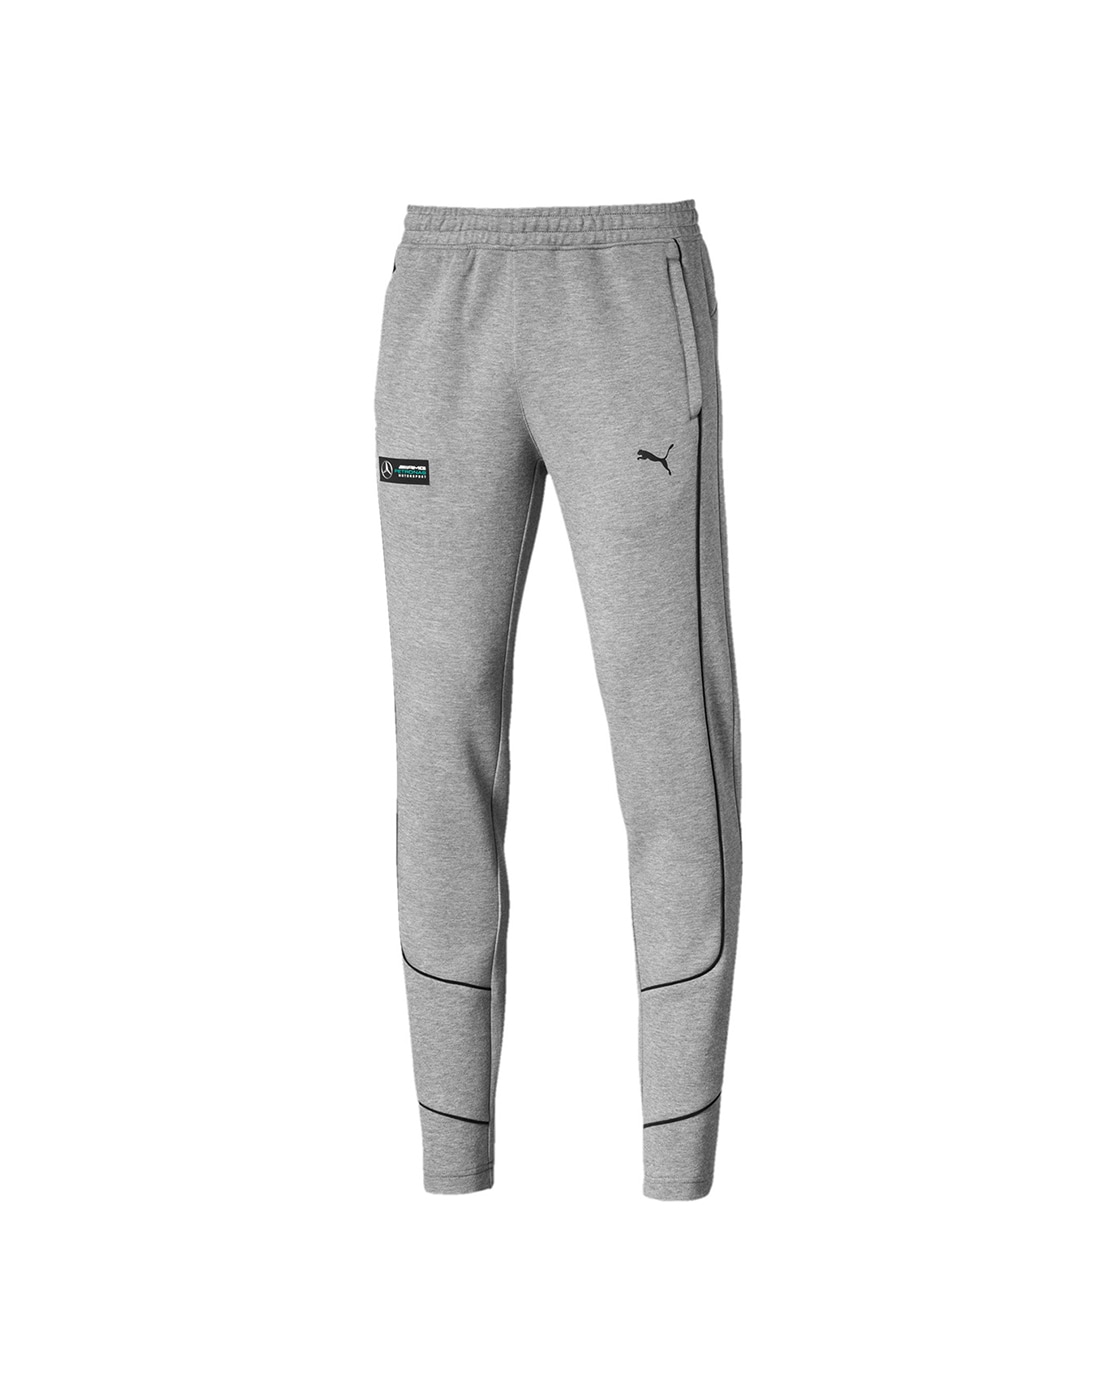 Buy Grey Track Pants for Men by Puma 